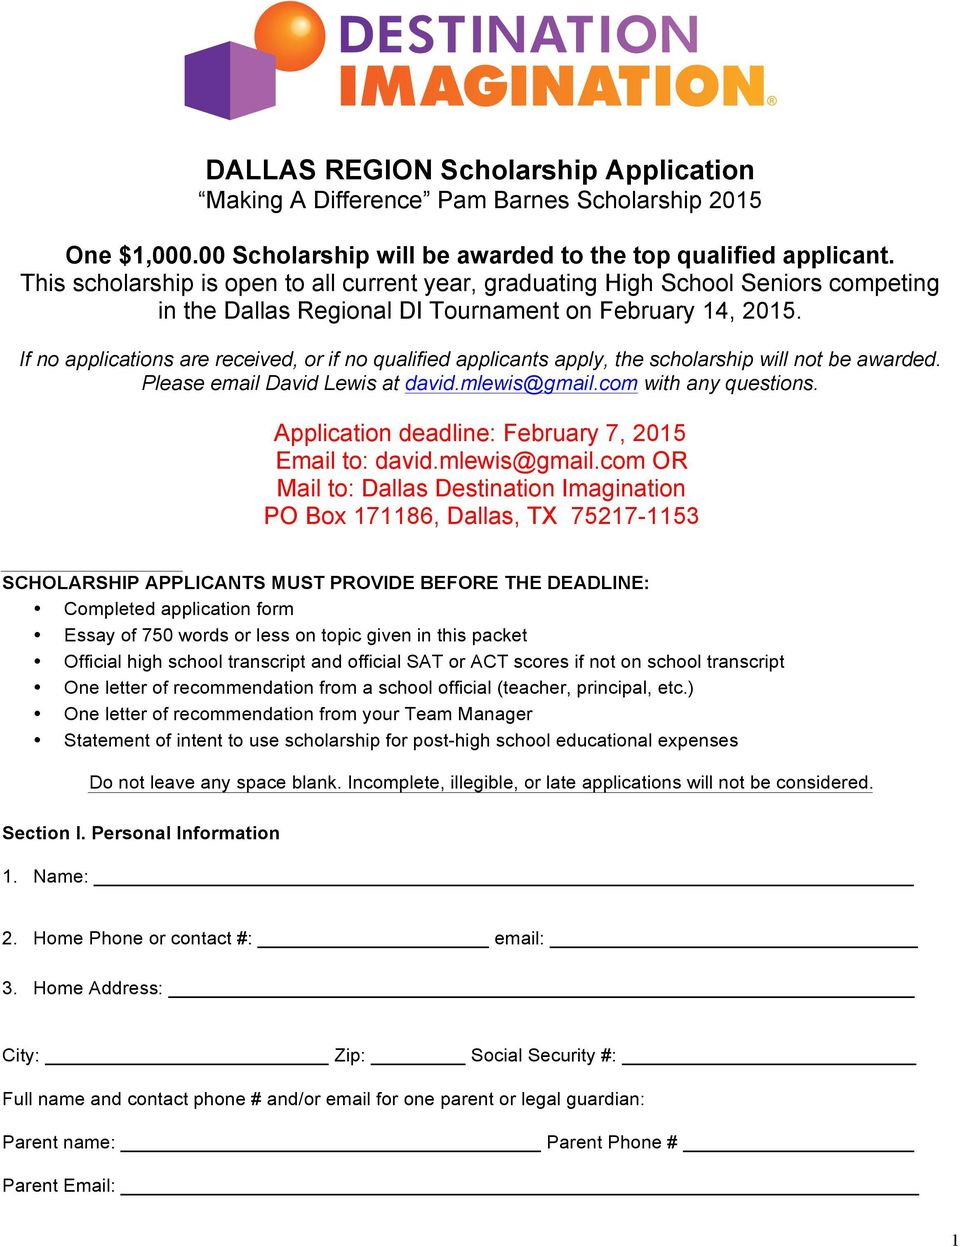 If no applications are received, or if no qualified applicants apply, the scholarship will not be awarded. Please email David Lewis at david.mlewis@gmail.com with any questions.